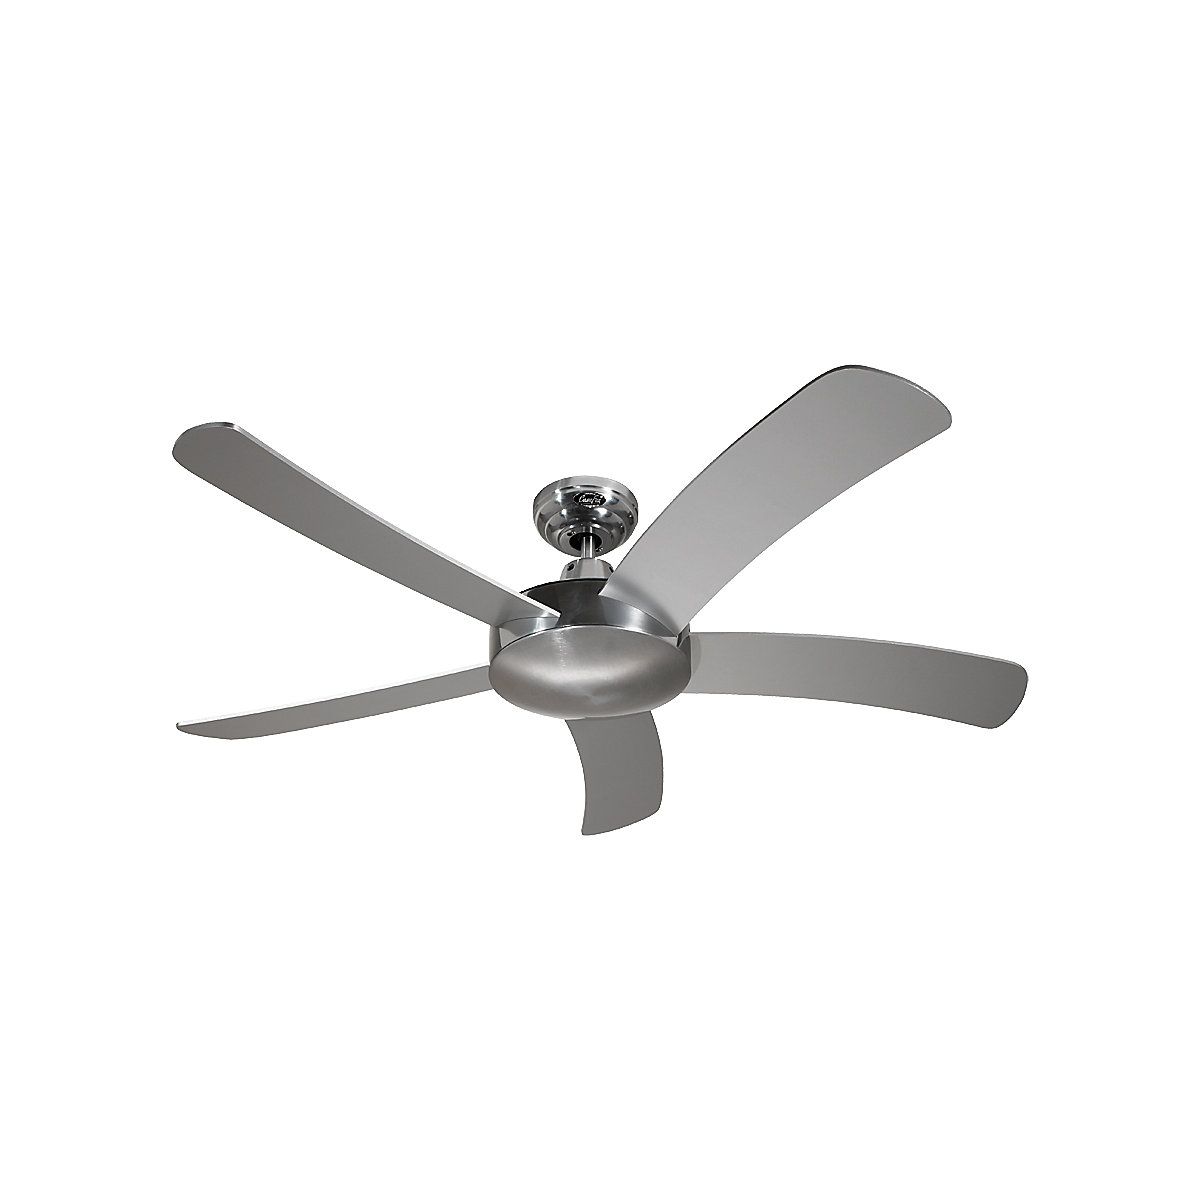 Falcetto Ceiling Fan Without Remote Control Kaiser Kraft International - How To Control Ceiling Fan Without Remote